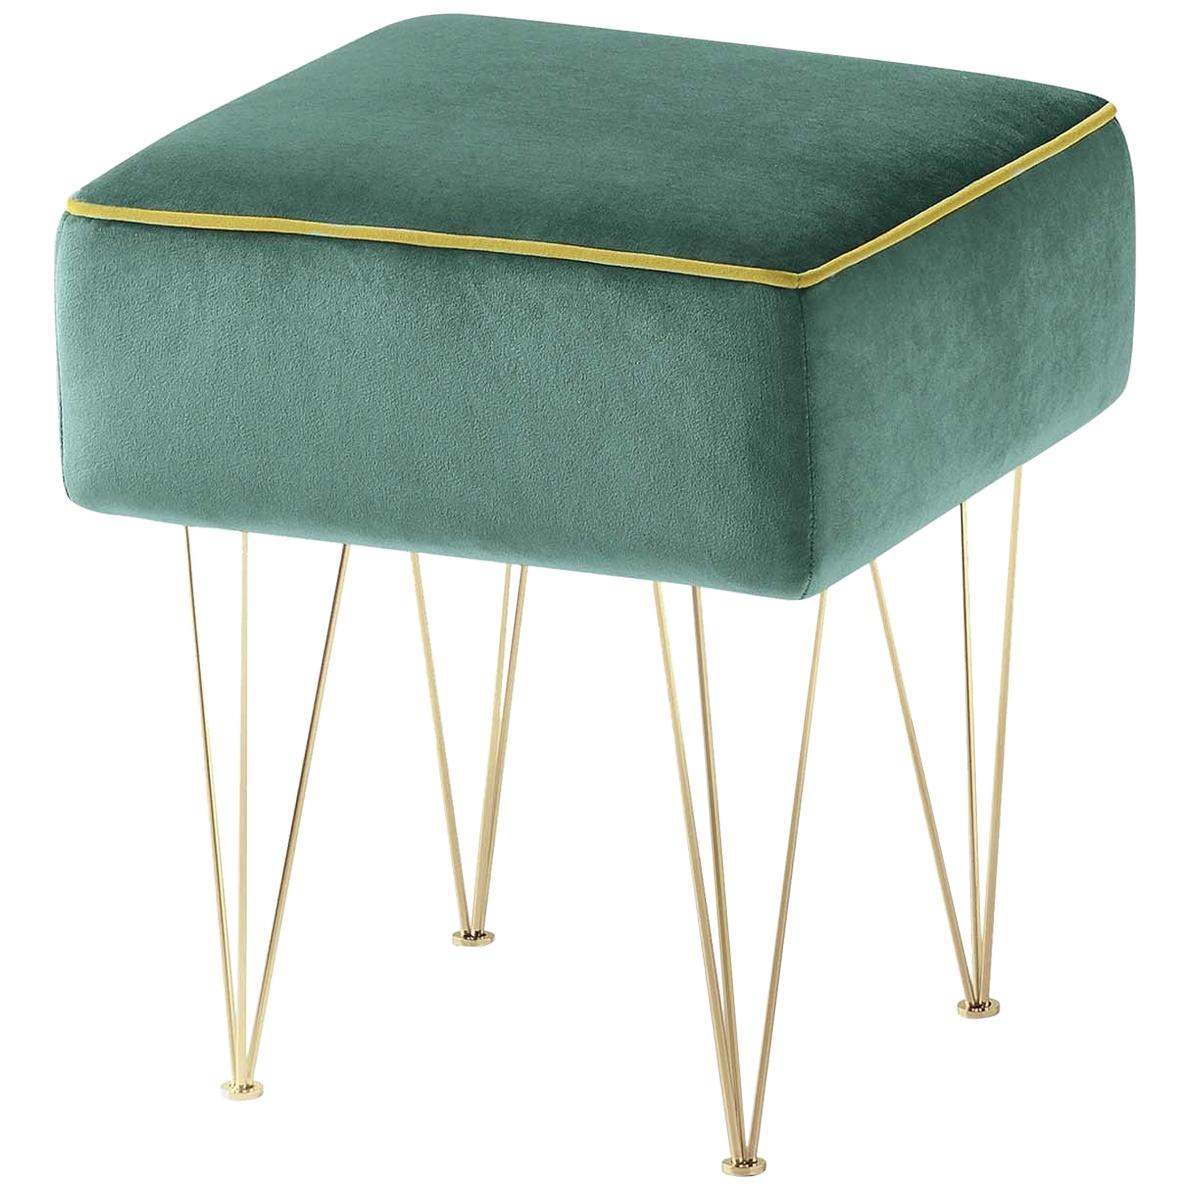 Pills Small Green Square pouf with Gold Legs